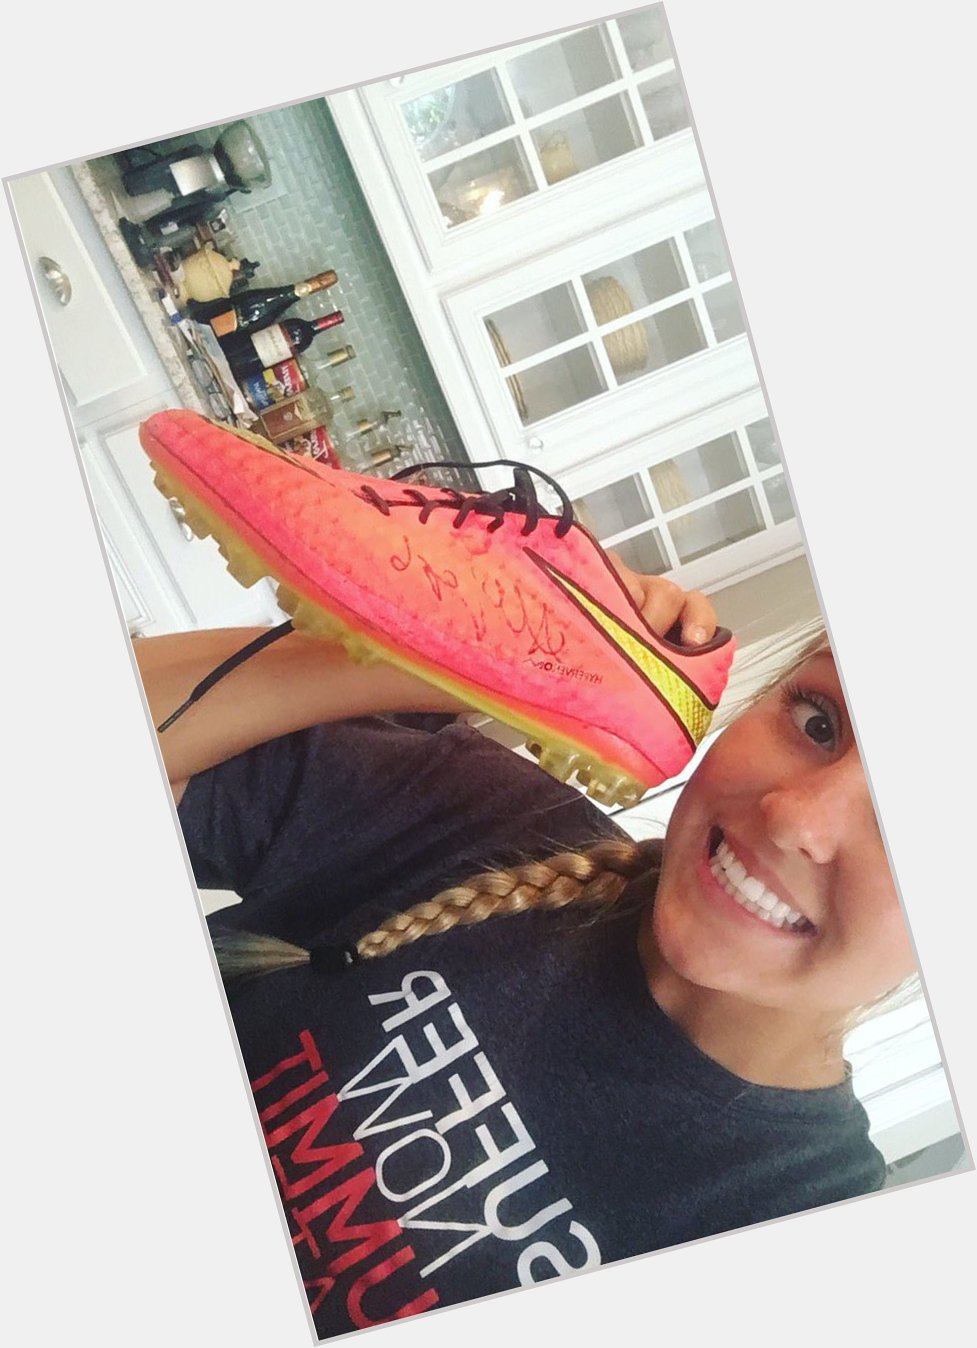 Happy Birthday Allie Long! Thanks for giving me your cleat 2 years ago:) .... I\m a huge fan     